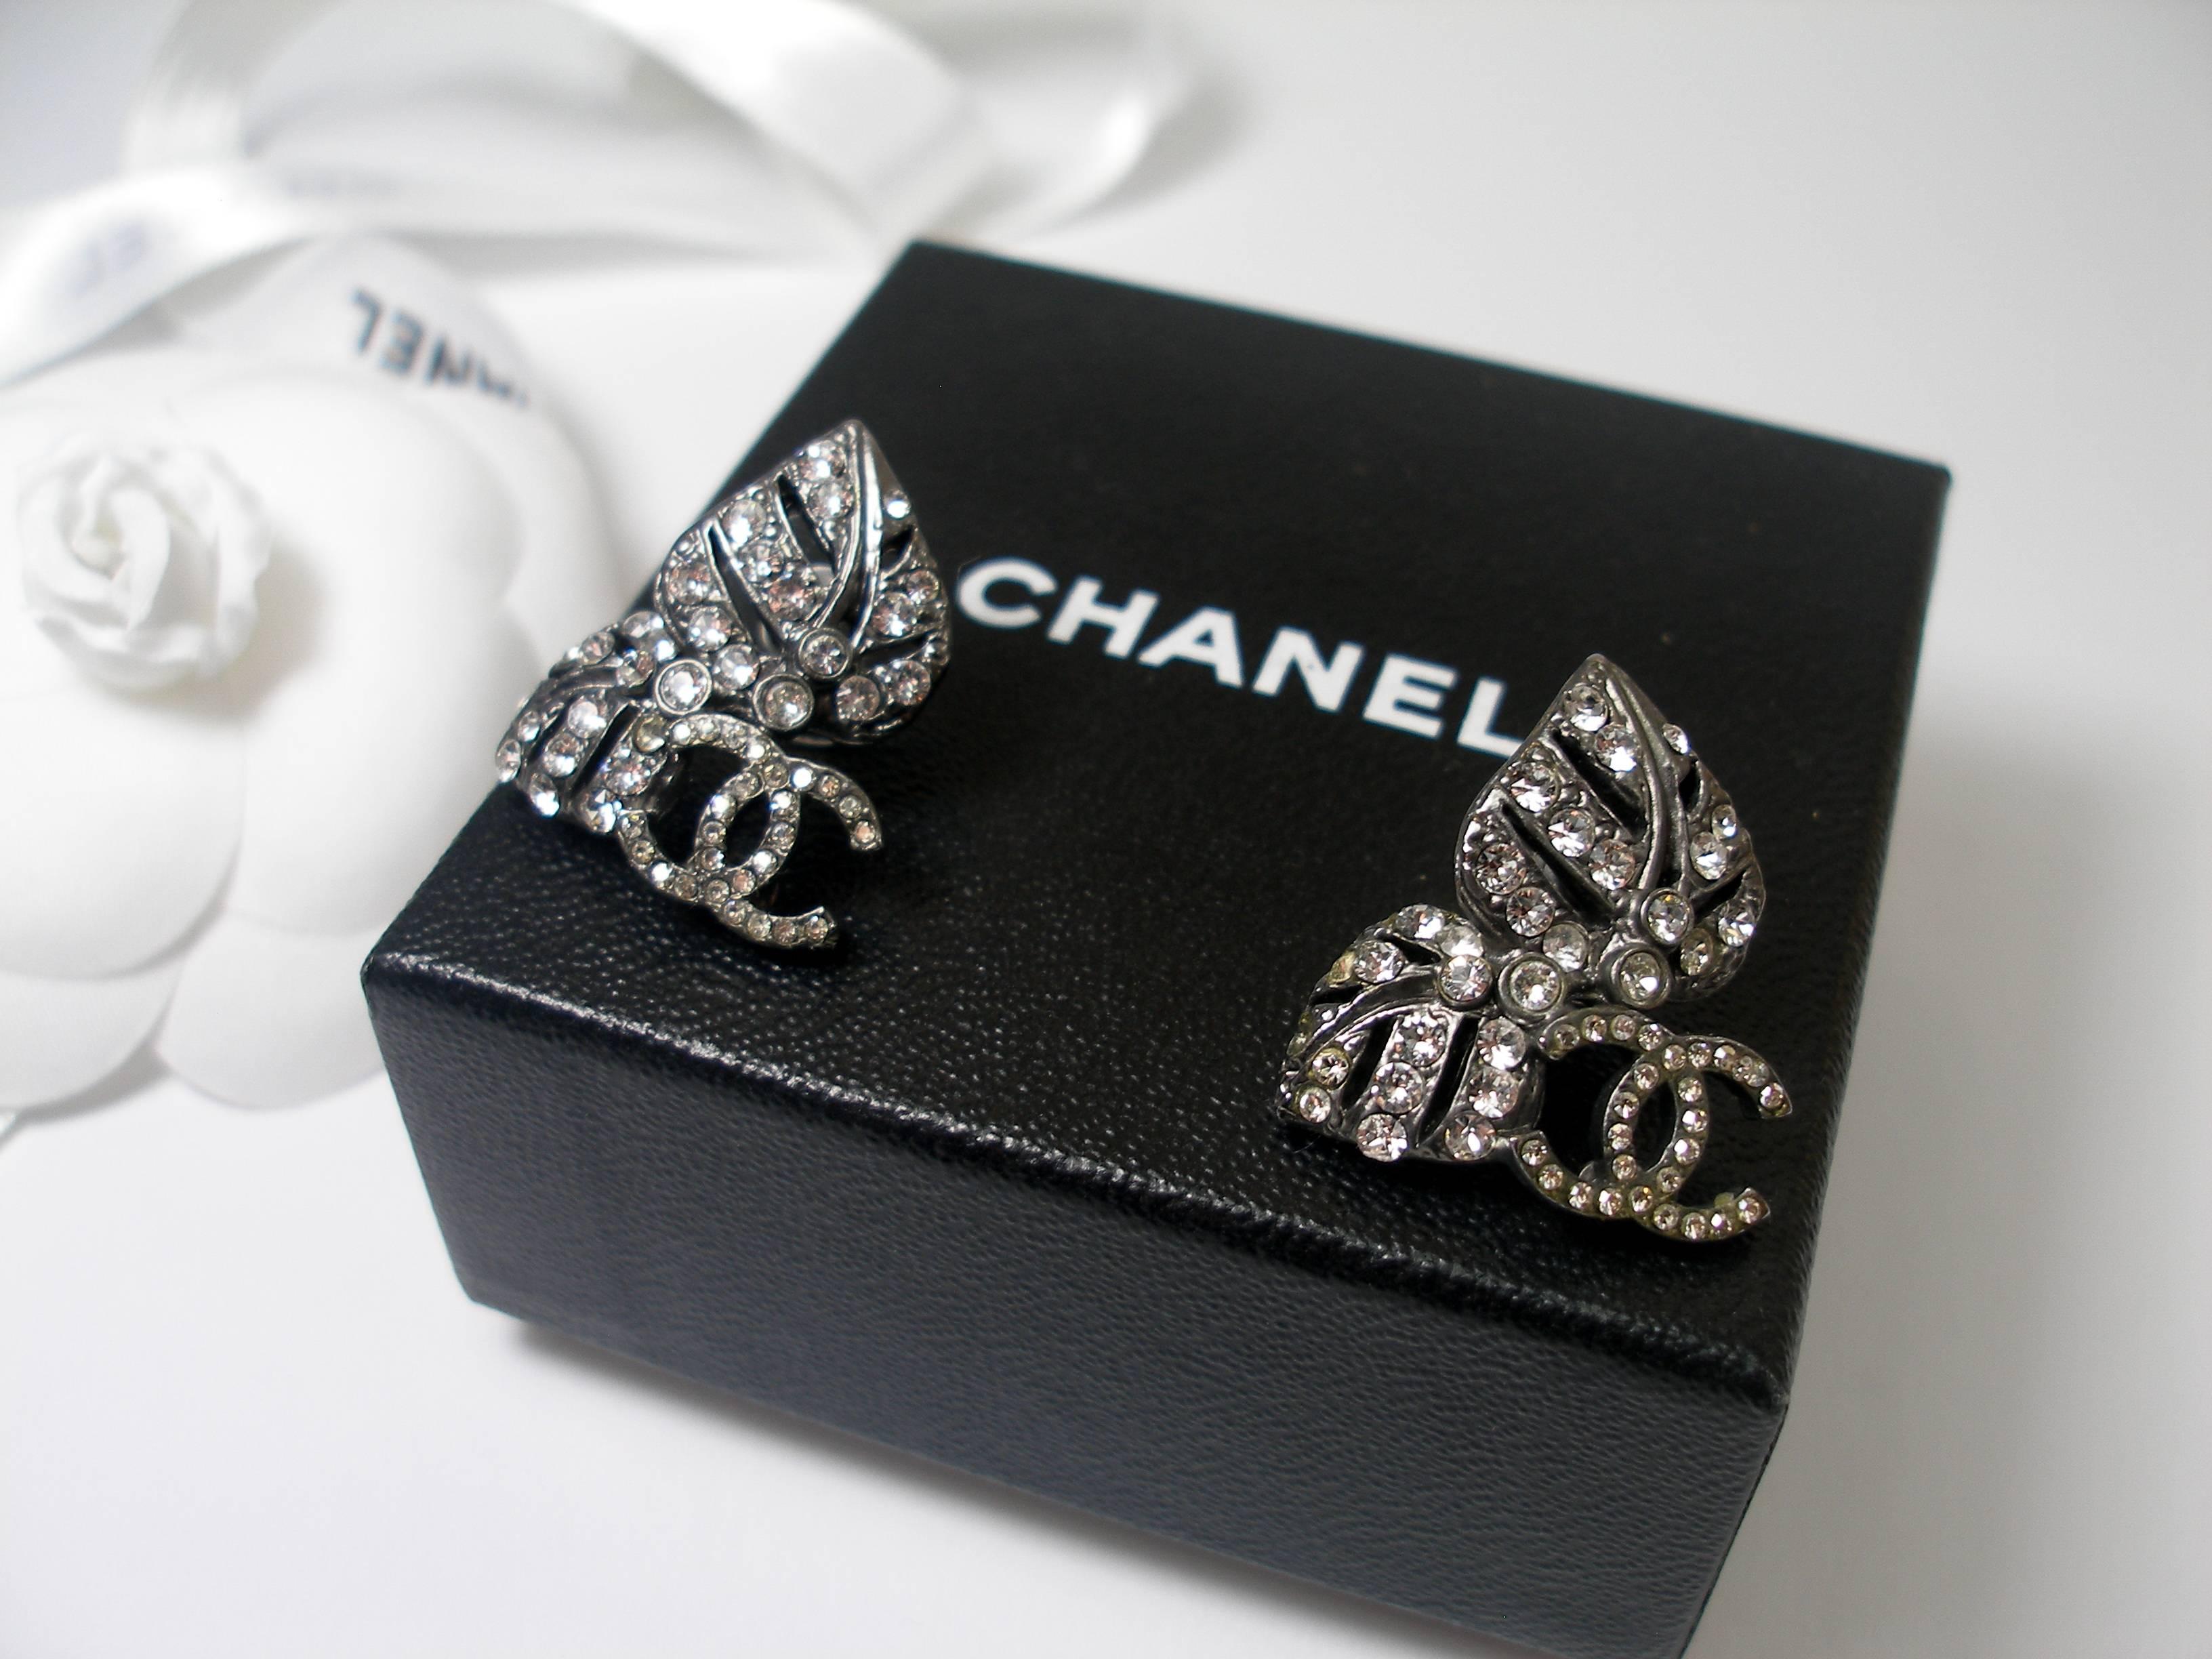 
Sublime earrings from the luxury brand Chanel (for pierced ears), in shape of leaf with the CC logo. 

The date code is visible at the back : 10CCA / Chanel made in France.

Color : Silver with glitz.

Dimension : 2 x 2.5 cm 

Its comes with Chanel